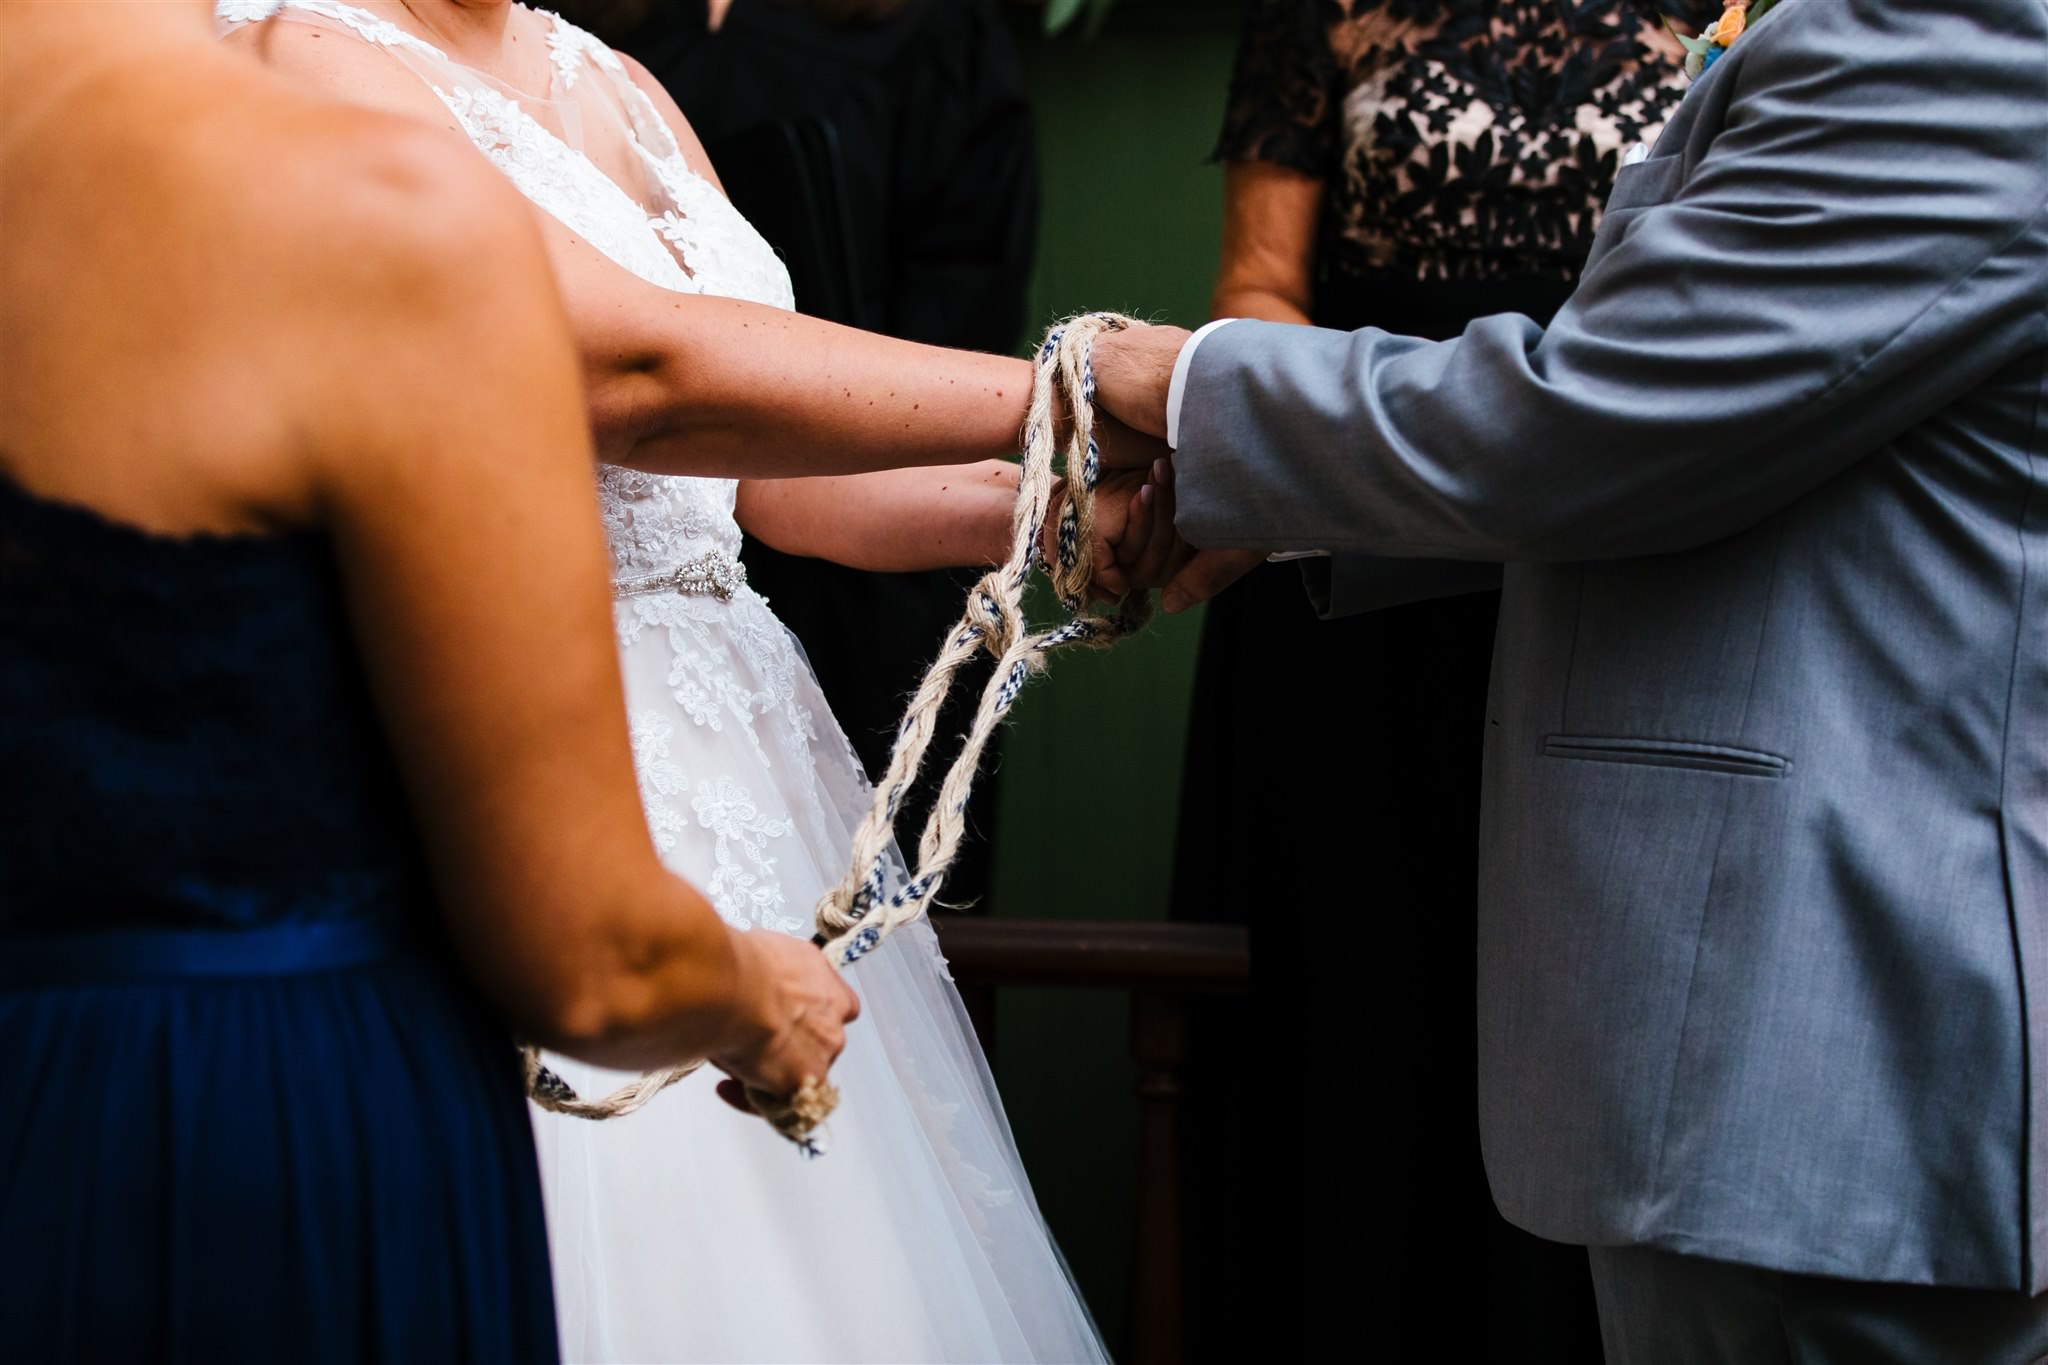 A close up of a knot tying ceremony during a wedding at the Fontainebleau Inn.